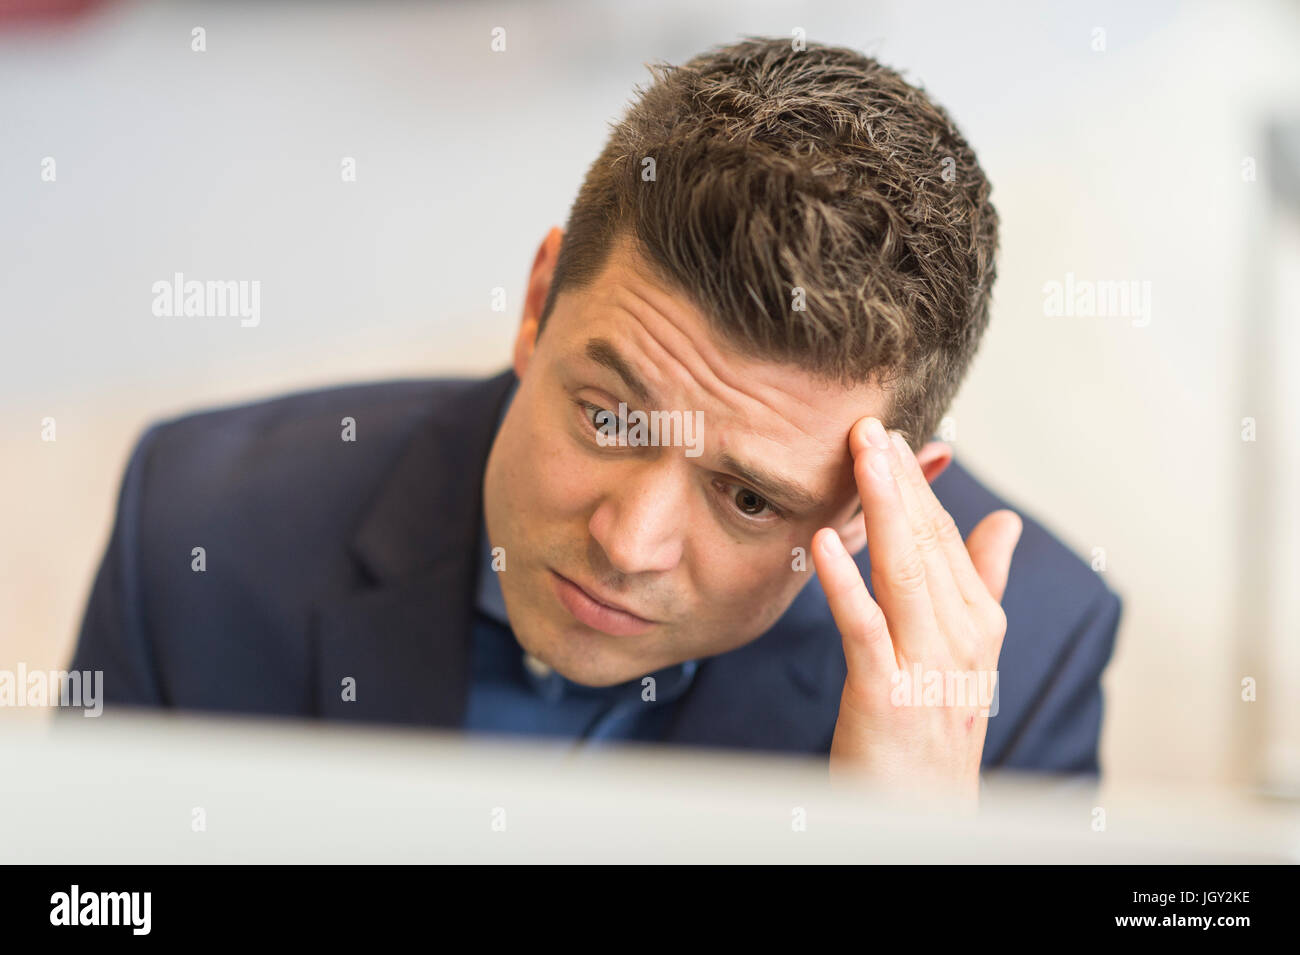 Worried businessman looking at computer in office Stock Photo